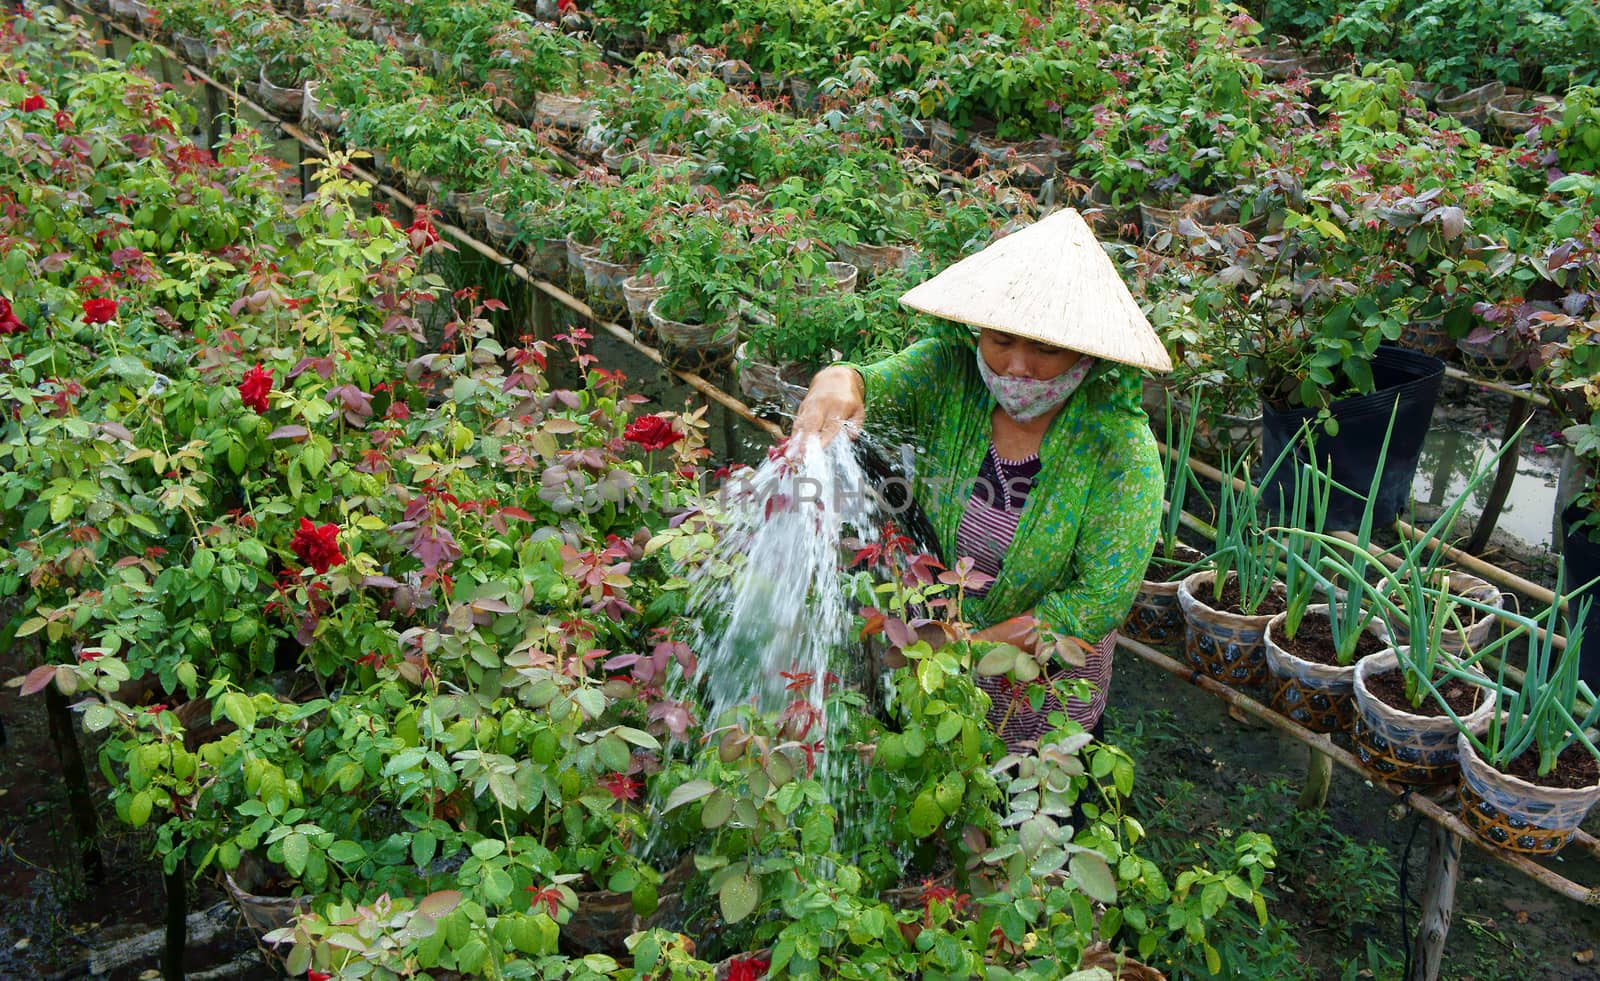 Farmer watering on flower garden ready for tet by xuanhuongho